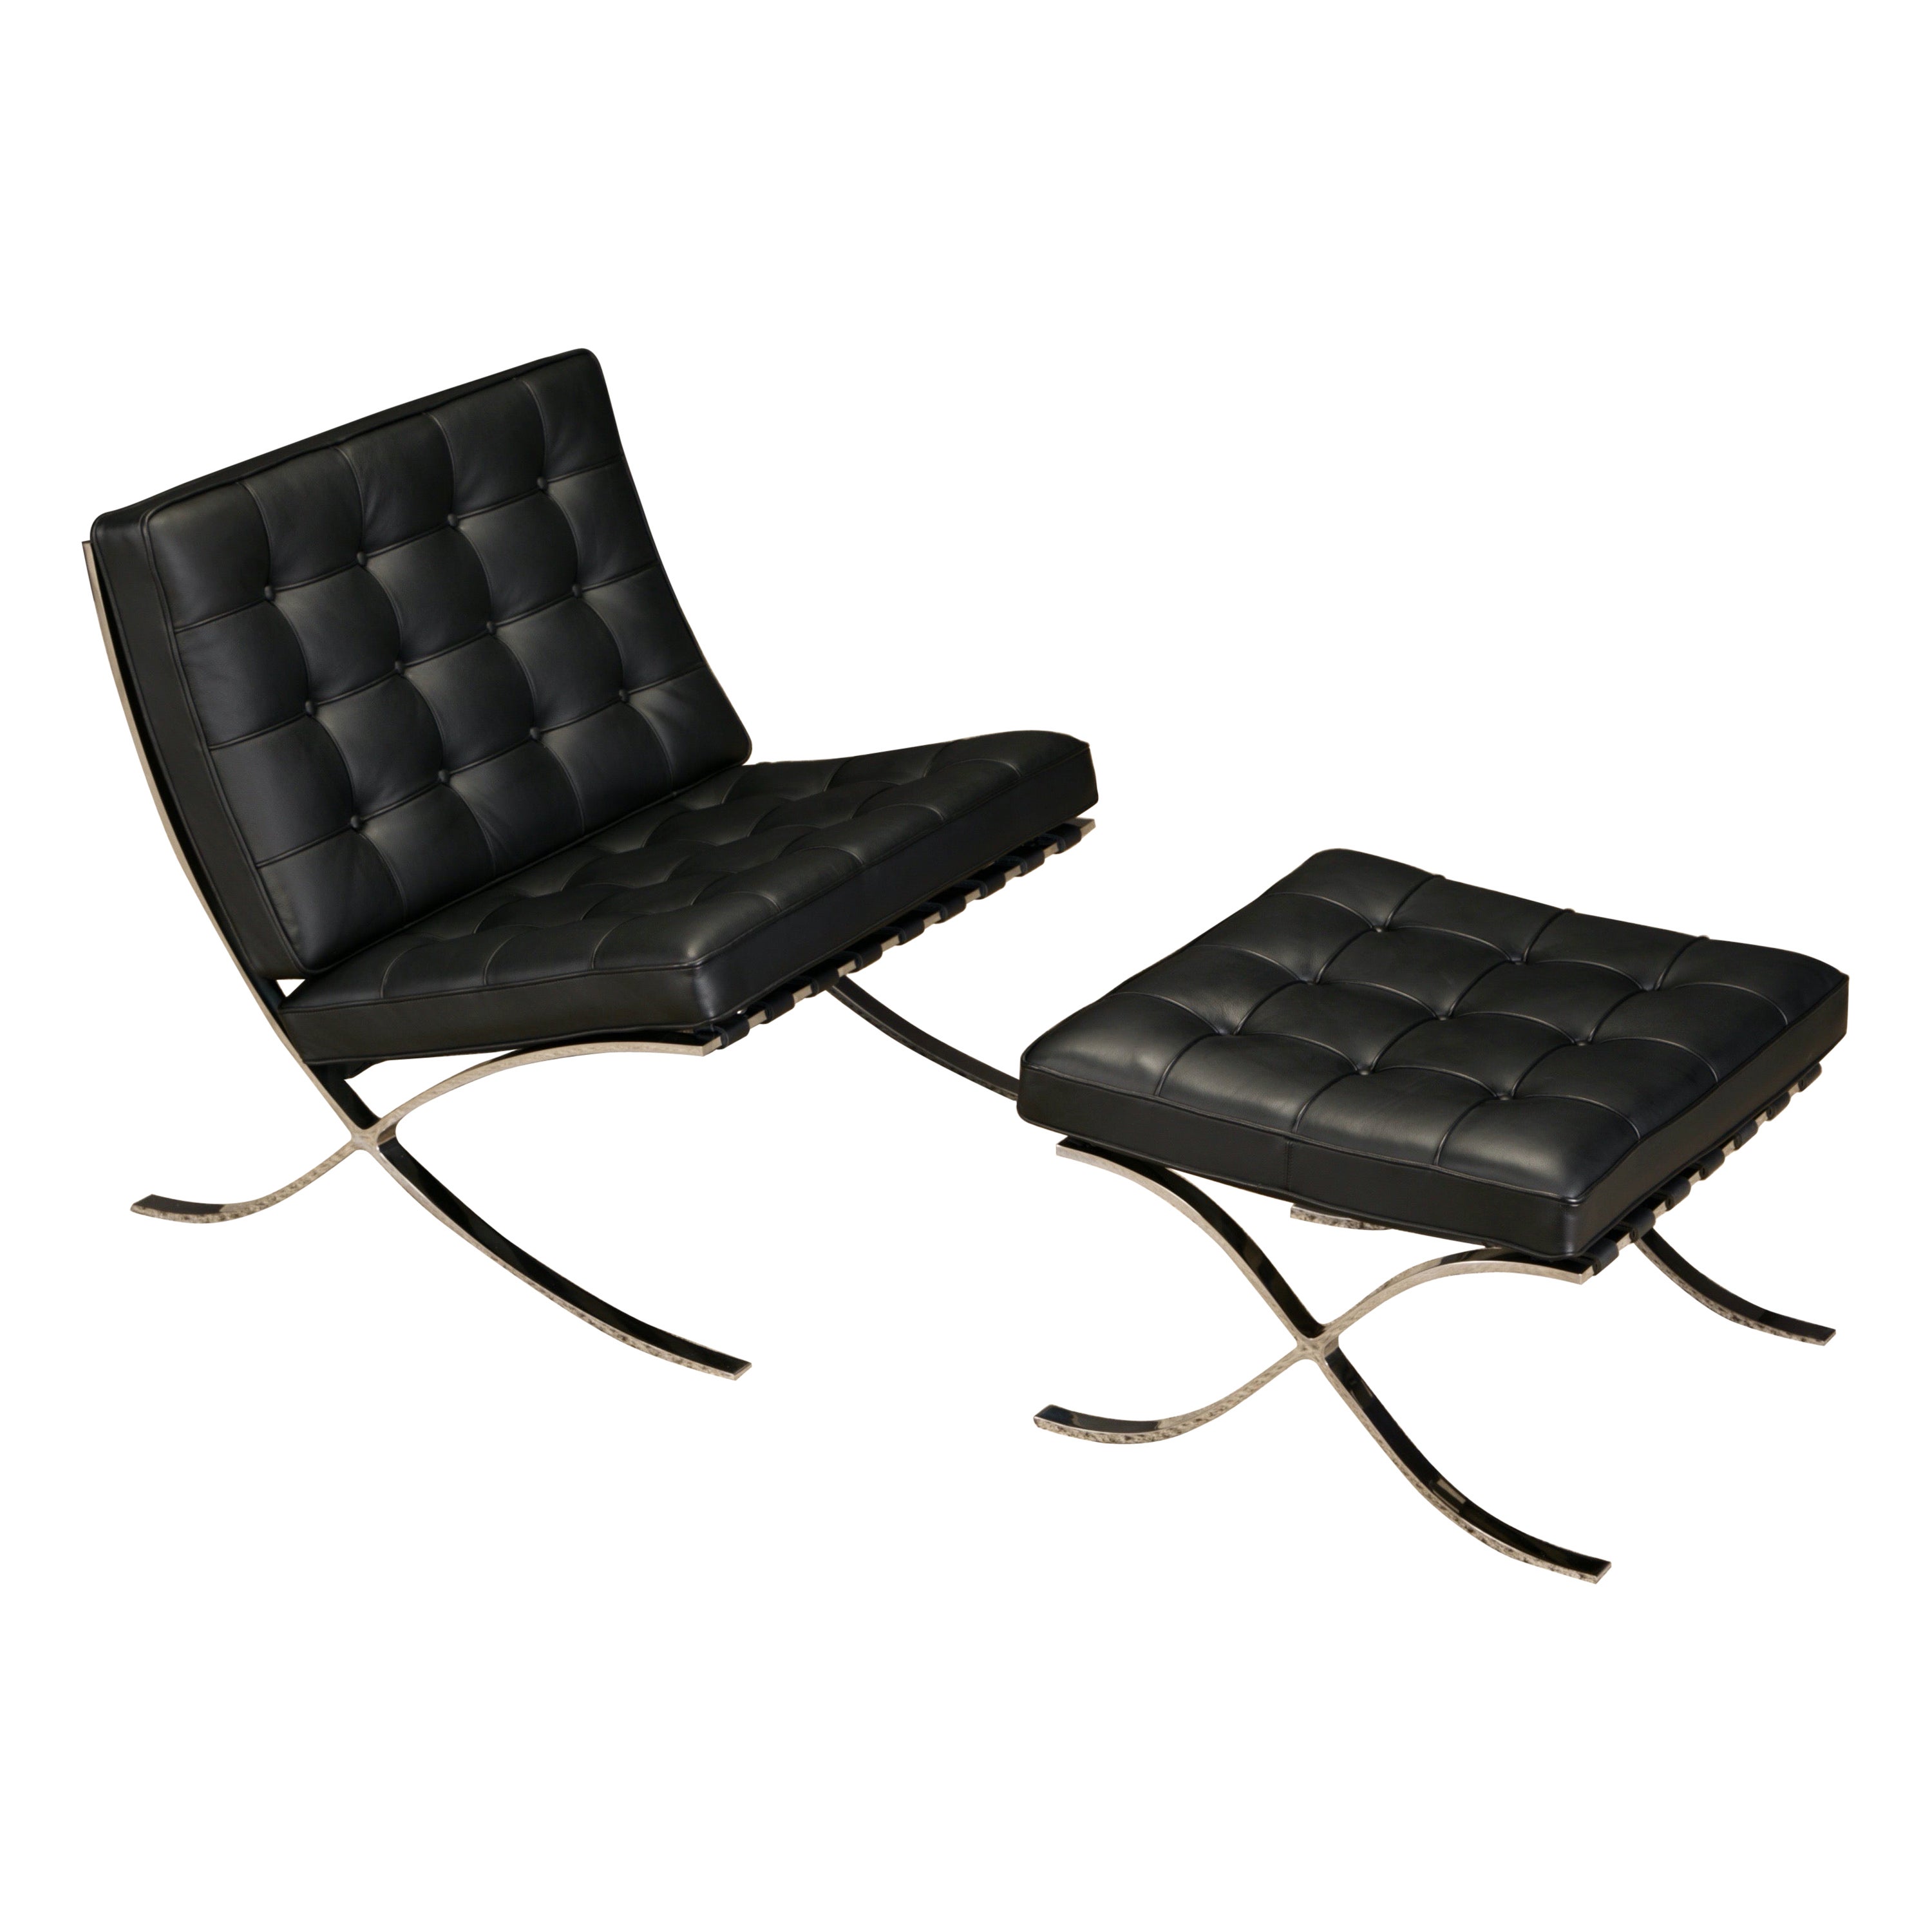 Barcelona Lounge Chair & Ottoman by Mies van der Rohe for Knoll Studios, Signed